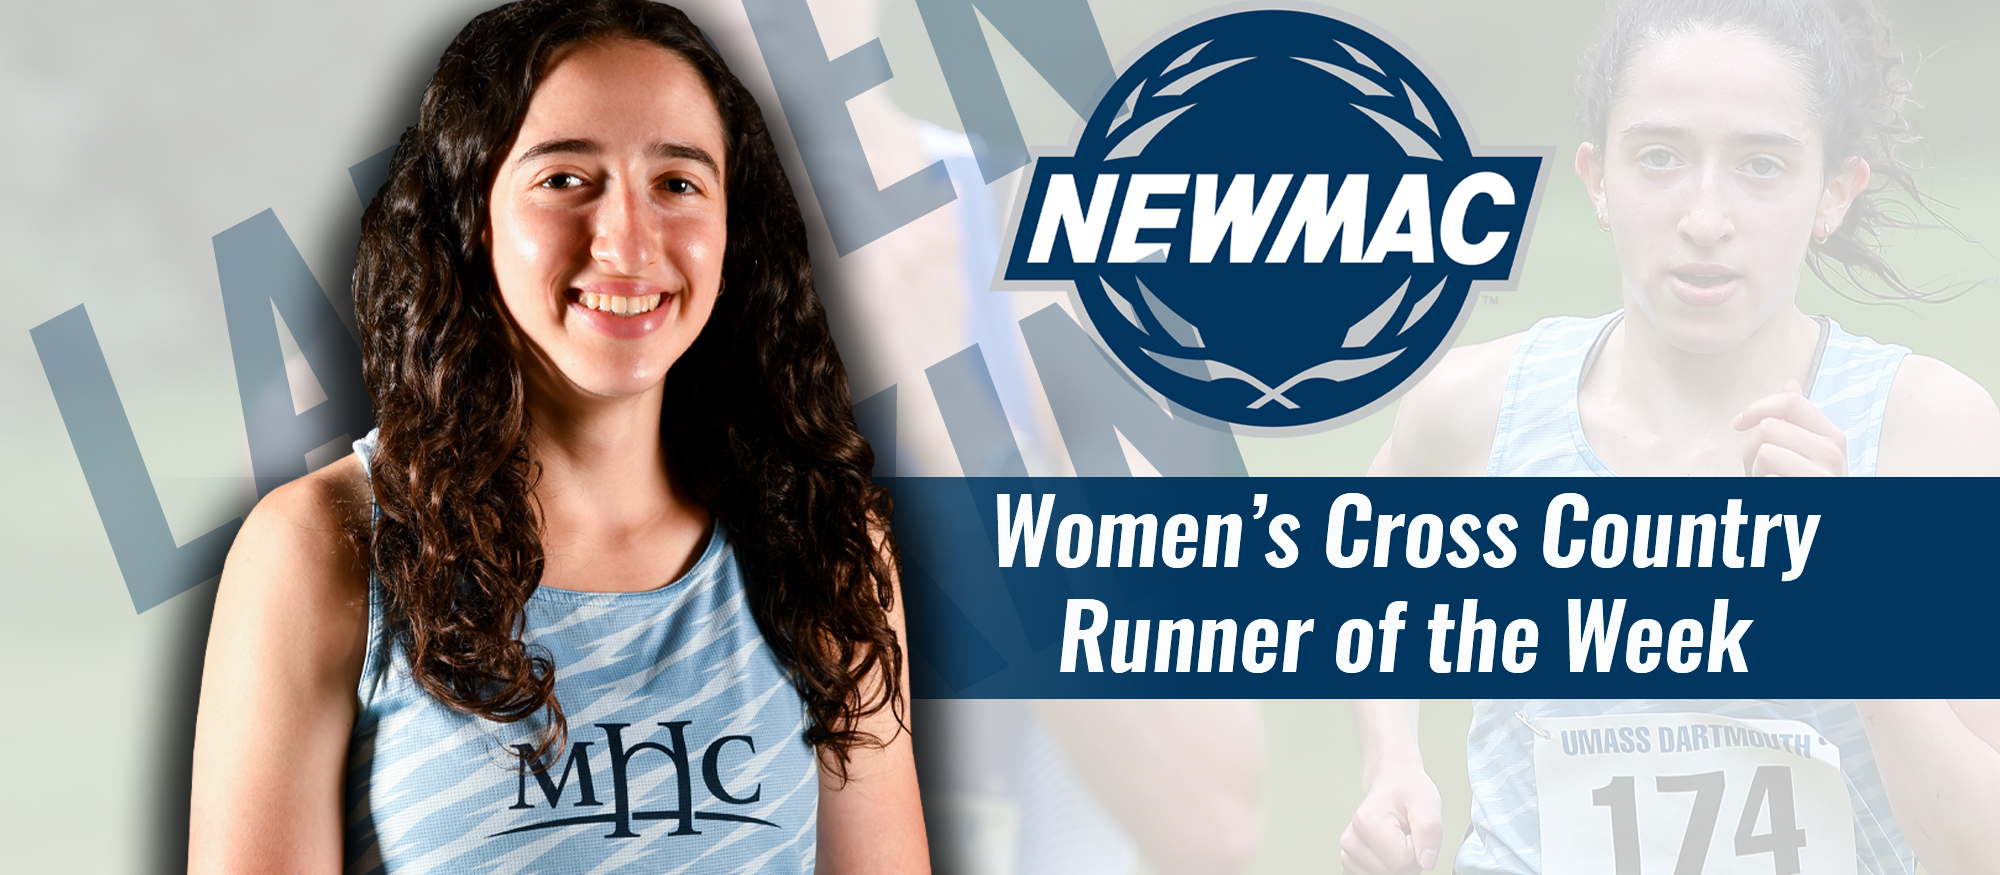 Selkin Collects NEWMAC Women's Cross Country Runner of the Week Honors For Second Time